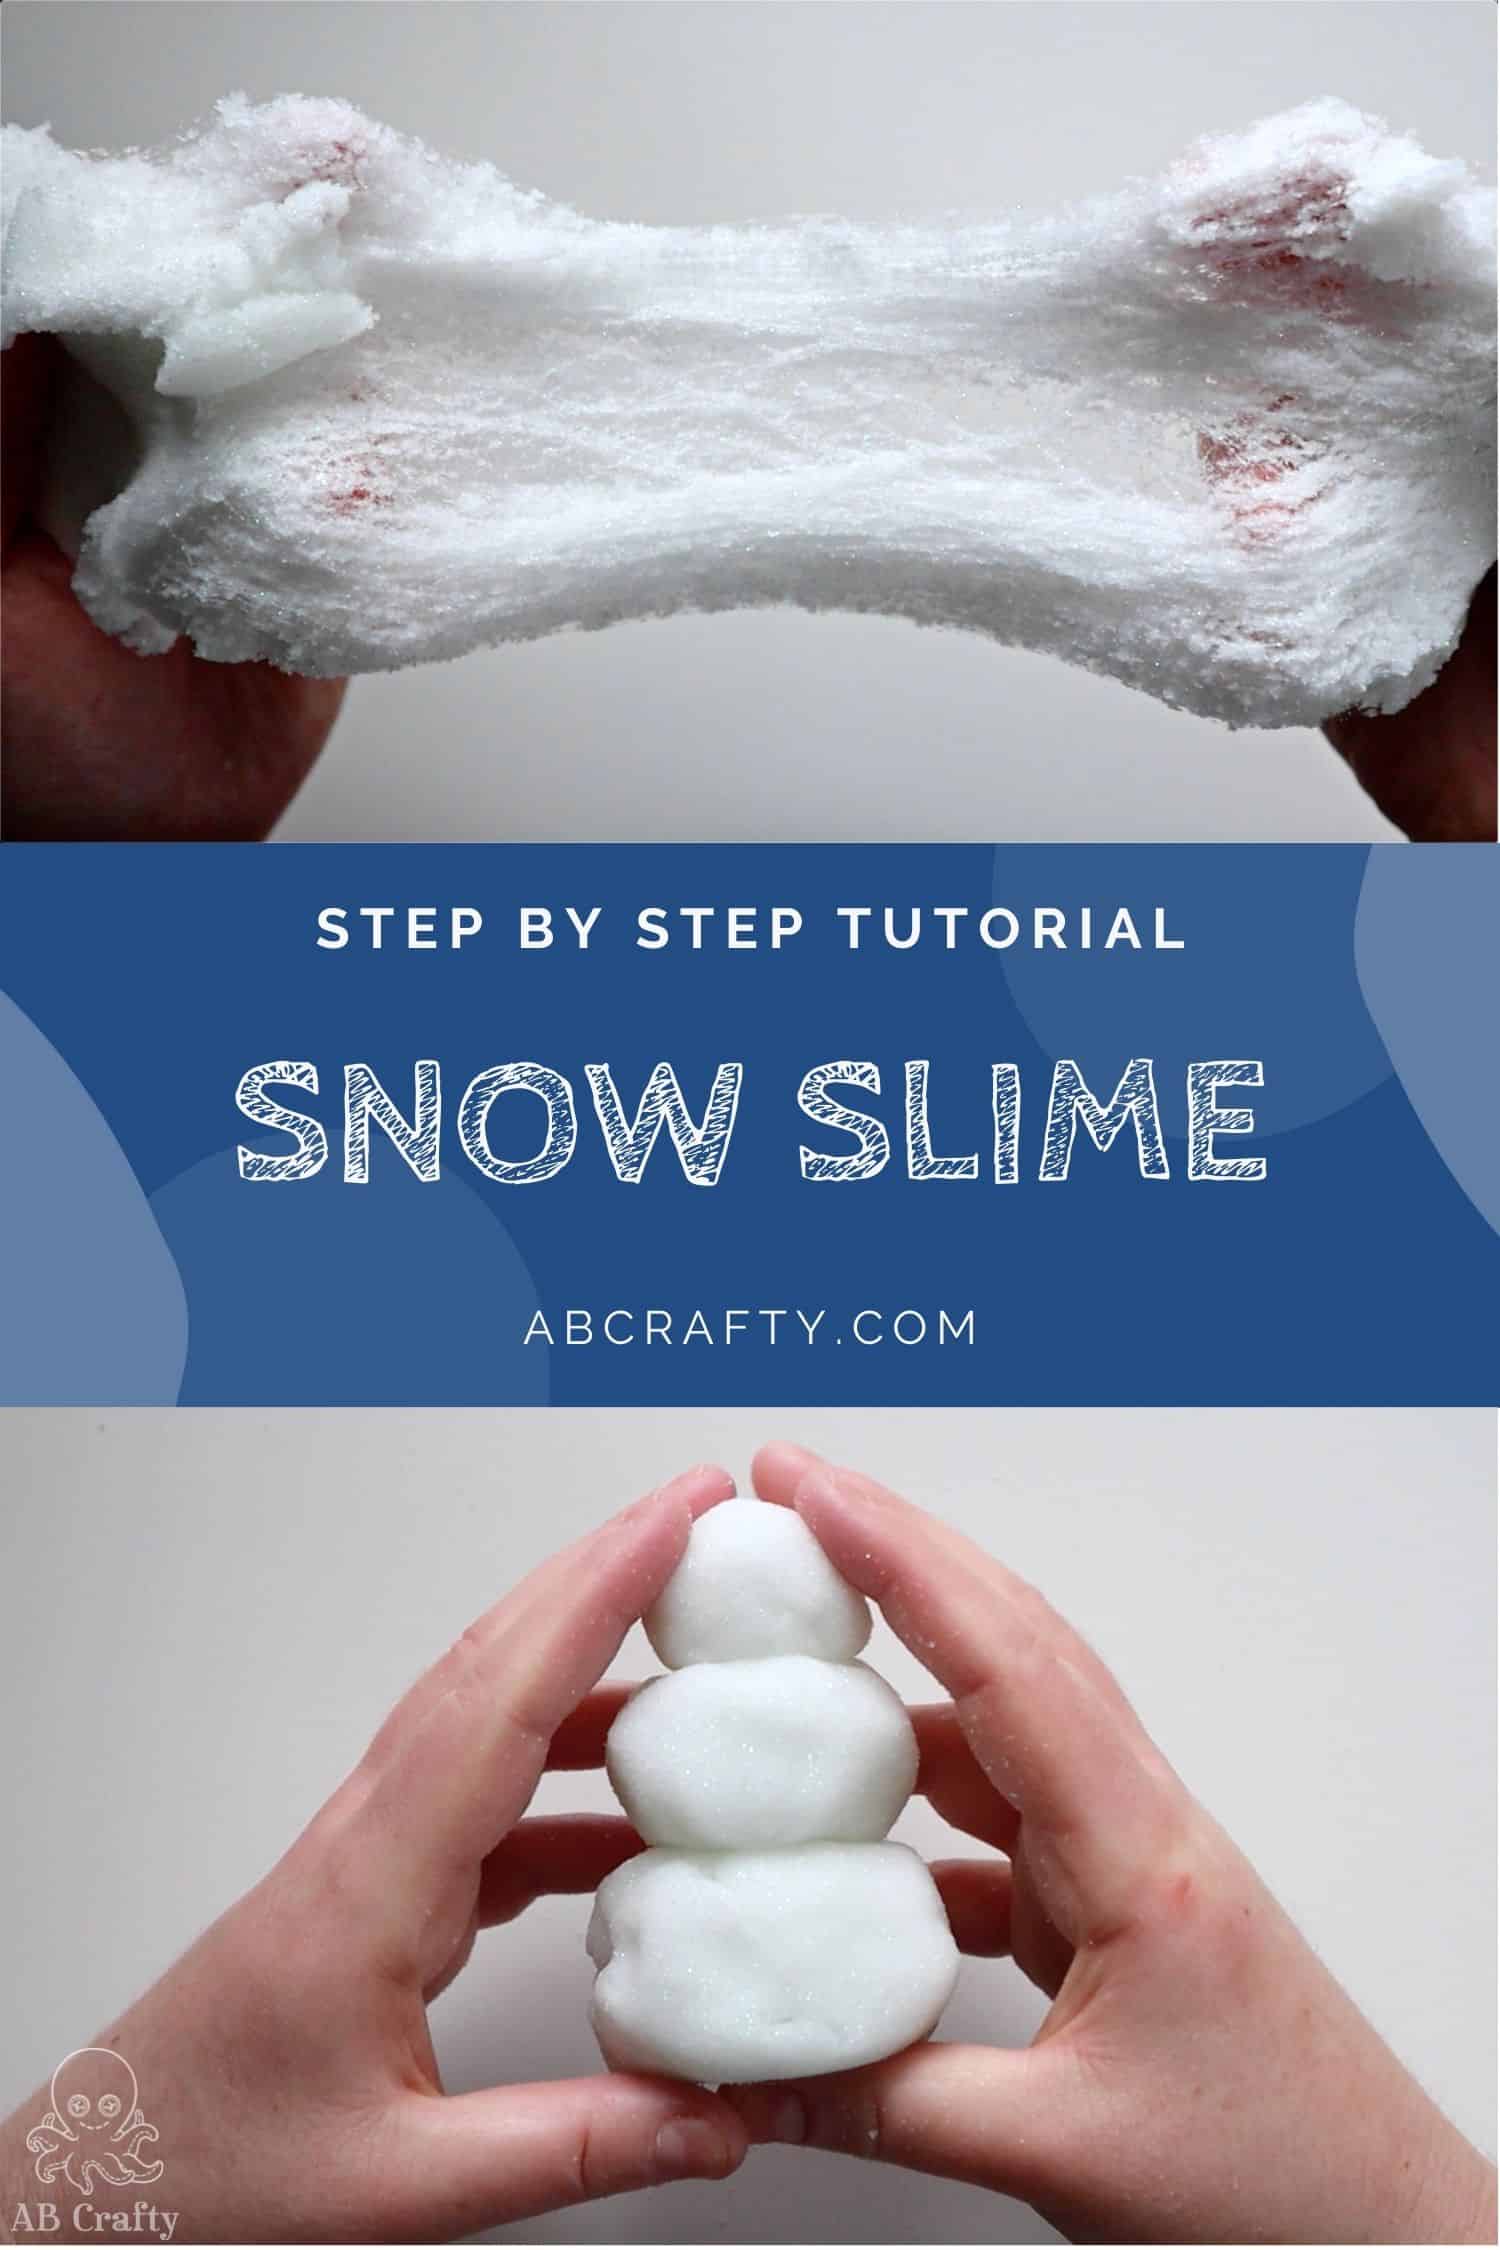 how to get instant snow out of your slime｜TikTok Search